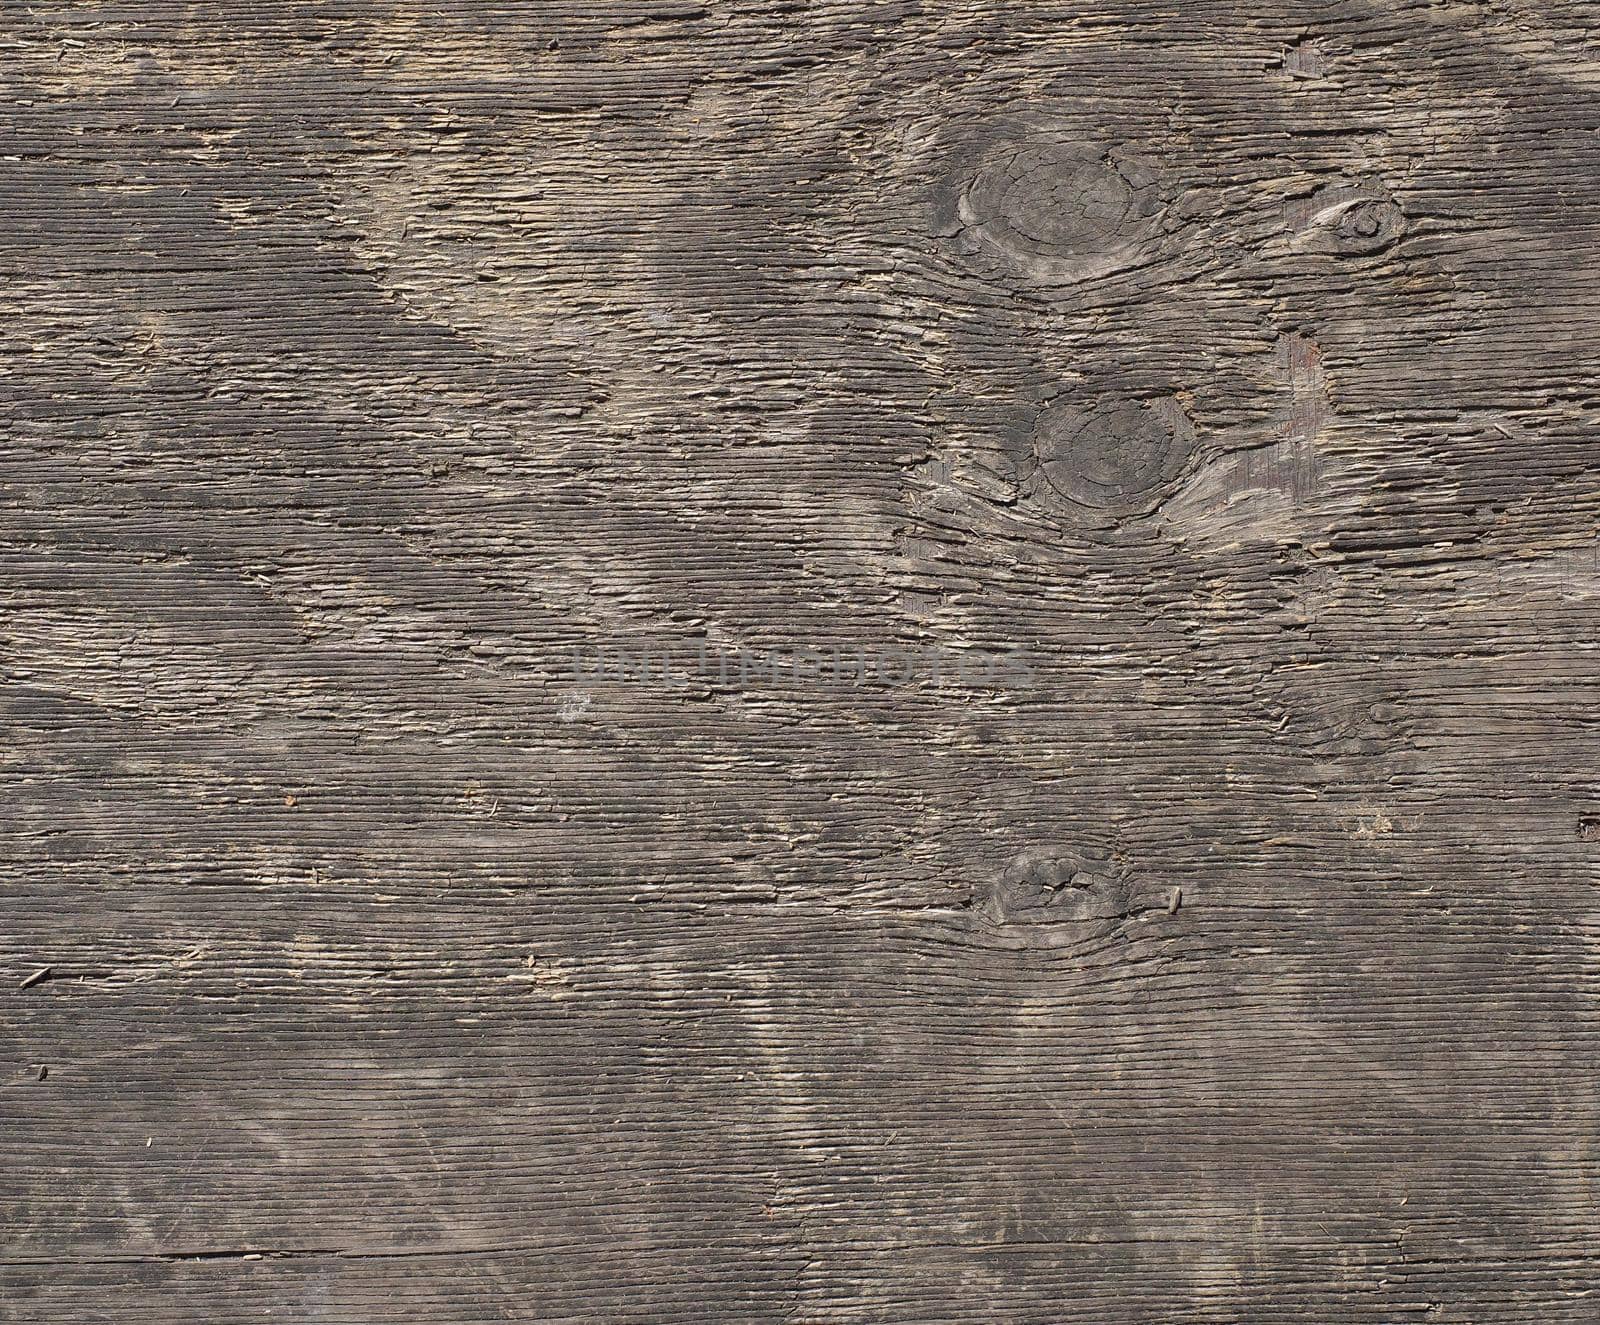 dark brown wood texture useful as a background